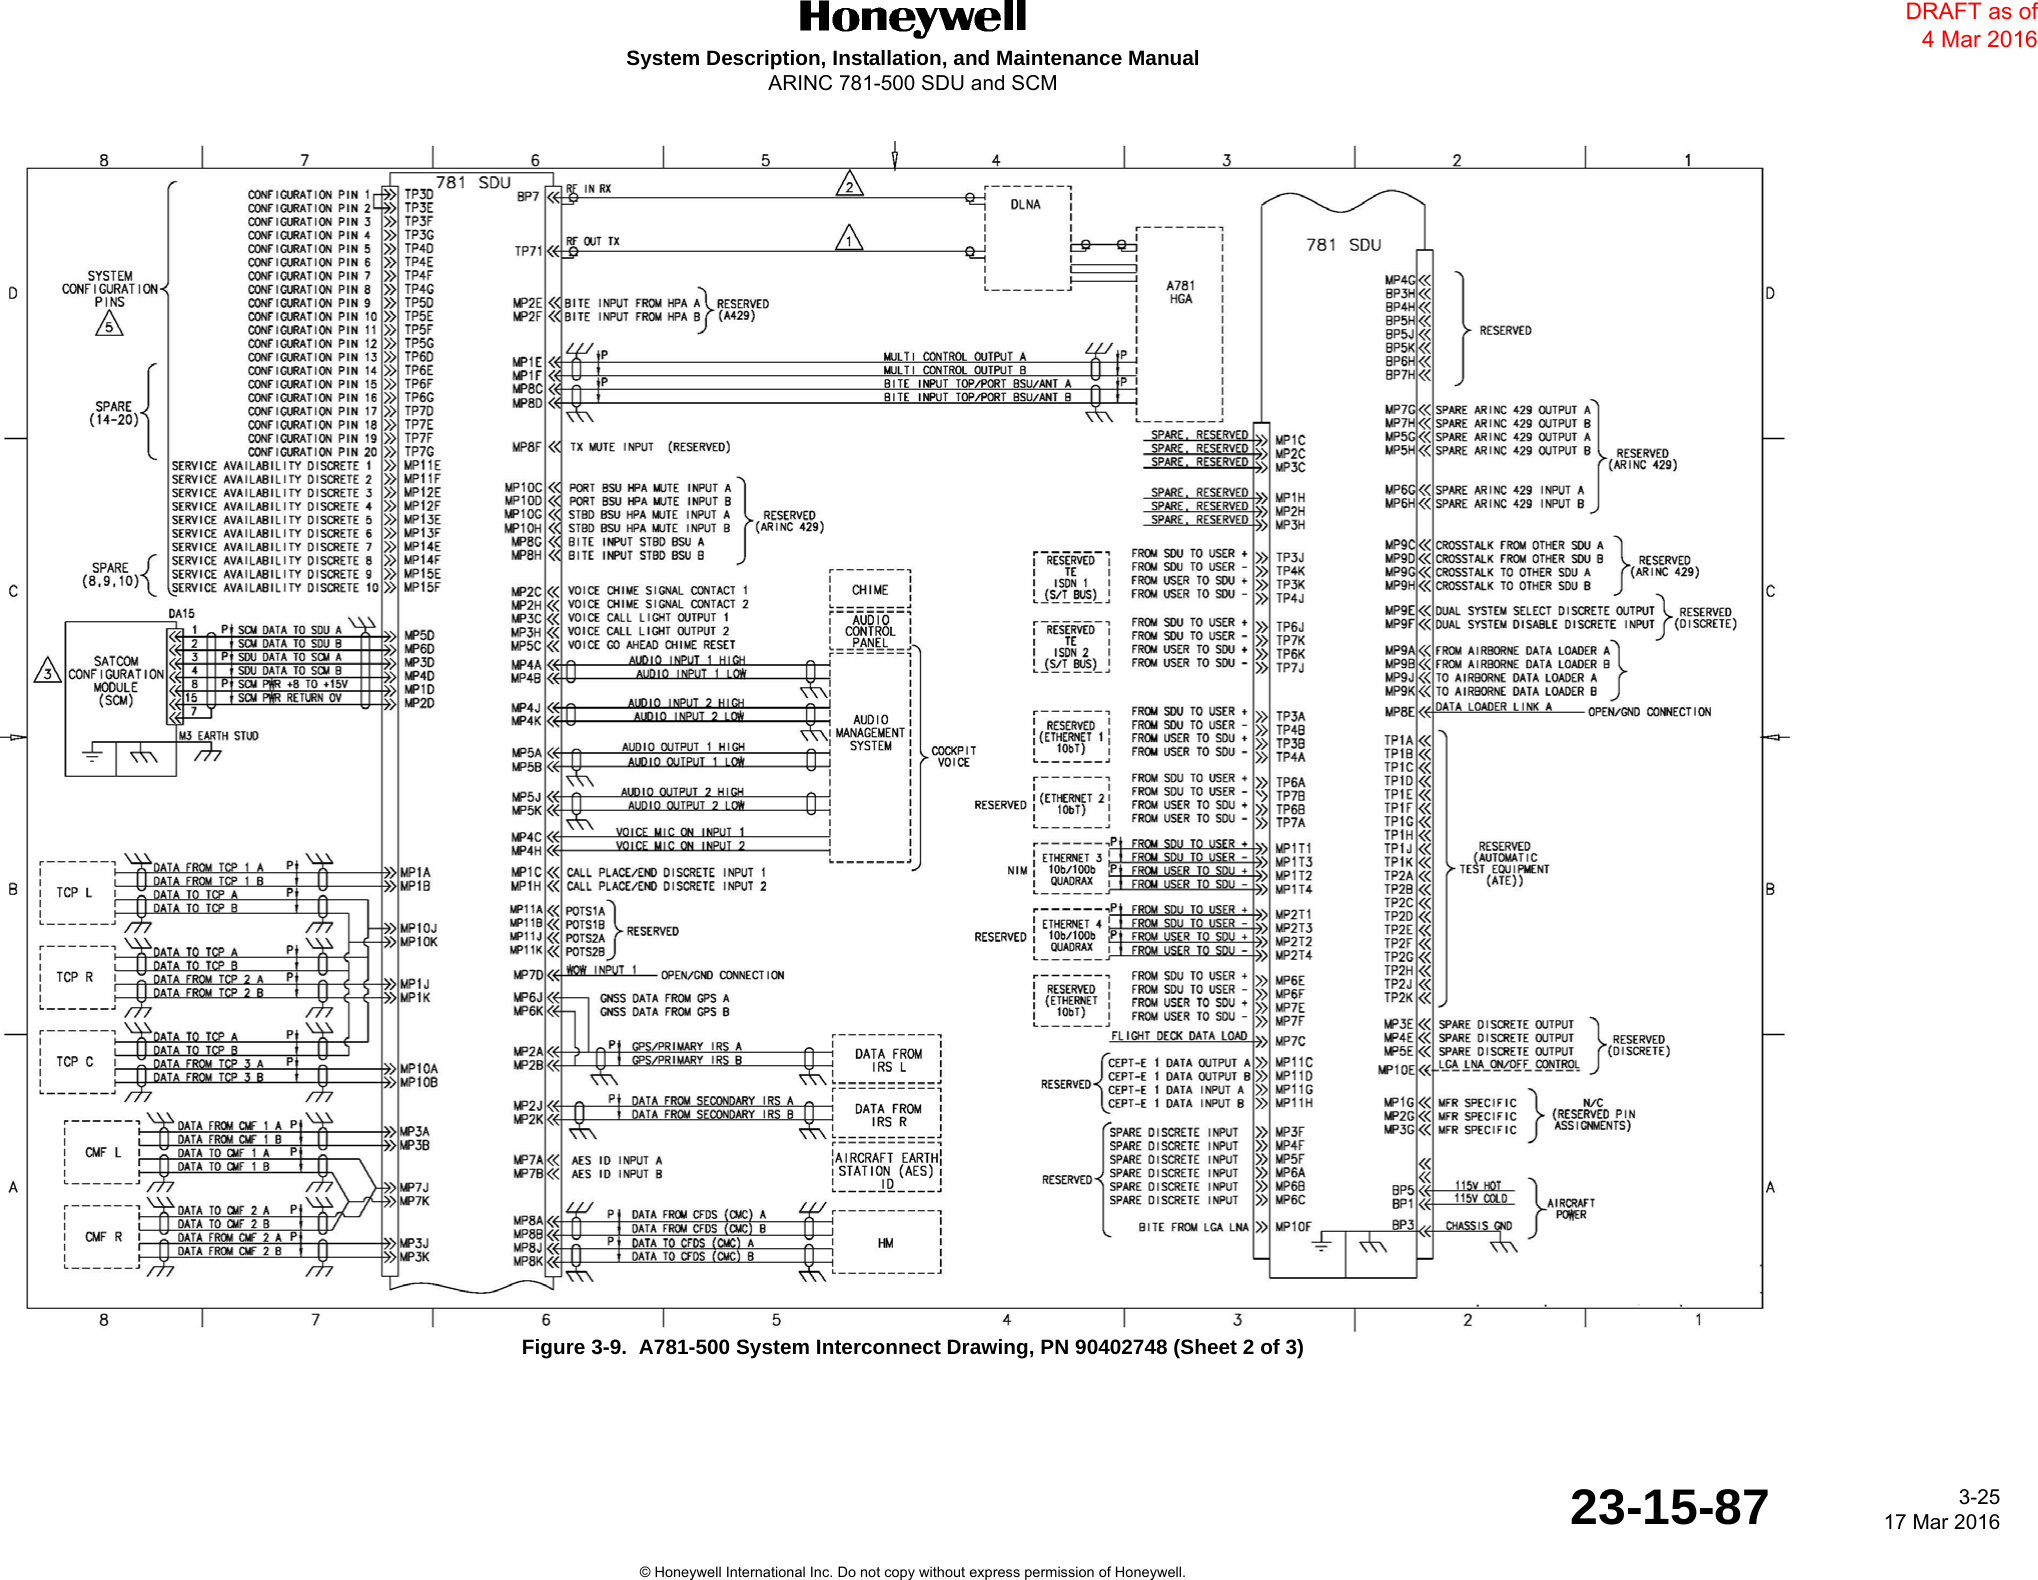 DRAFTSystem Description, Installation, and Maintenance ManualARINC 781-500 SDU and SCM 3-2517 Mar 201623-15-87© Honeywell International Inc. Do not copy without express permission of Honeywell.Figure 3-9.  A781-500 System Interconnect Drawing, PN 90402748 (Sheet 2 of 3)DRAFT as of 4 Mar 2016